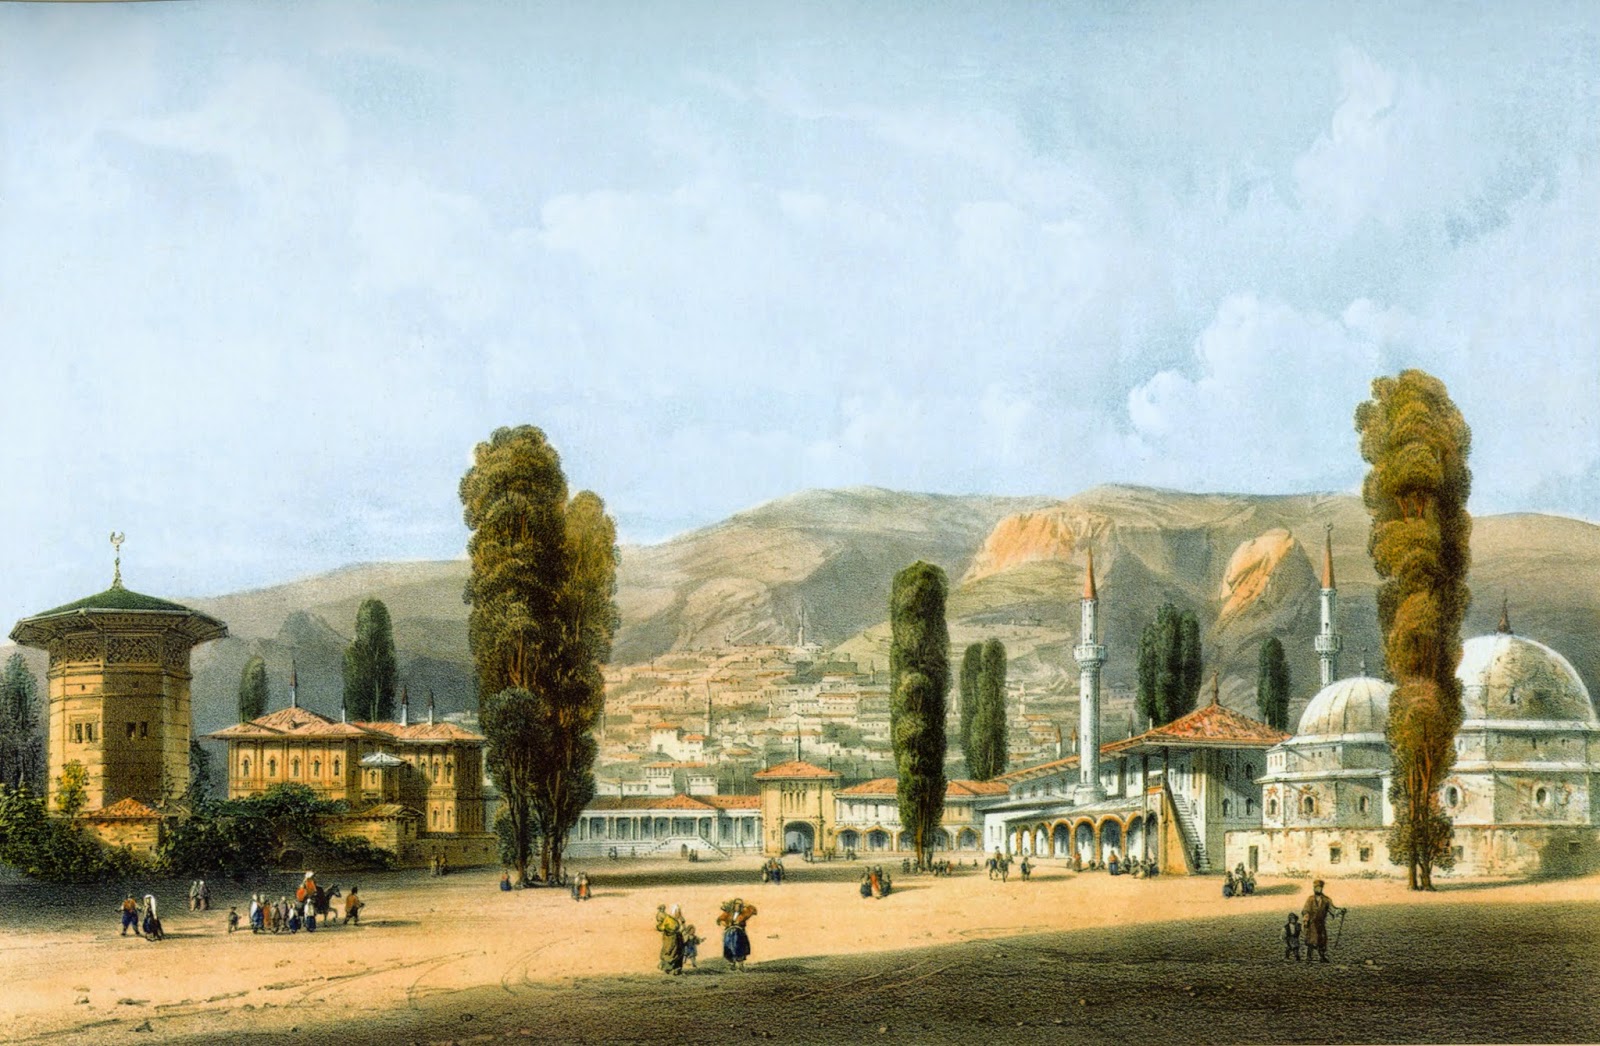 The Palace of the Crimean Khan in Bakhchysarai, Crimea, a lithograph from the collection by Carlo Bossoli, 1843.